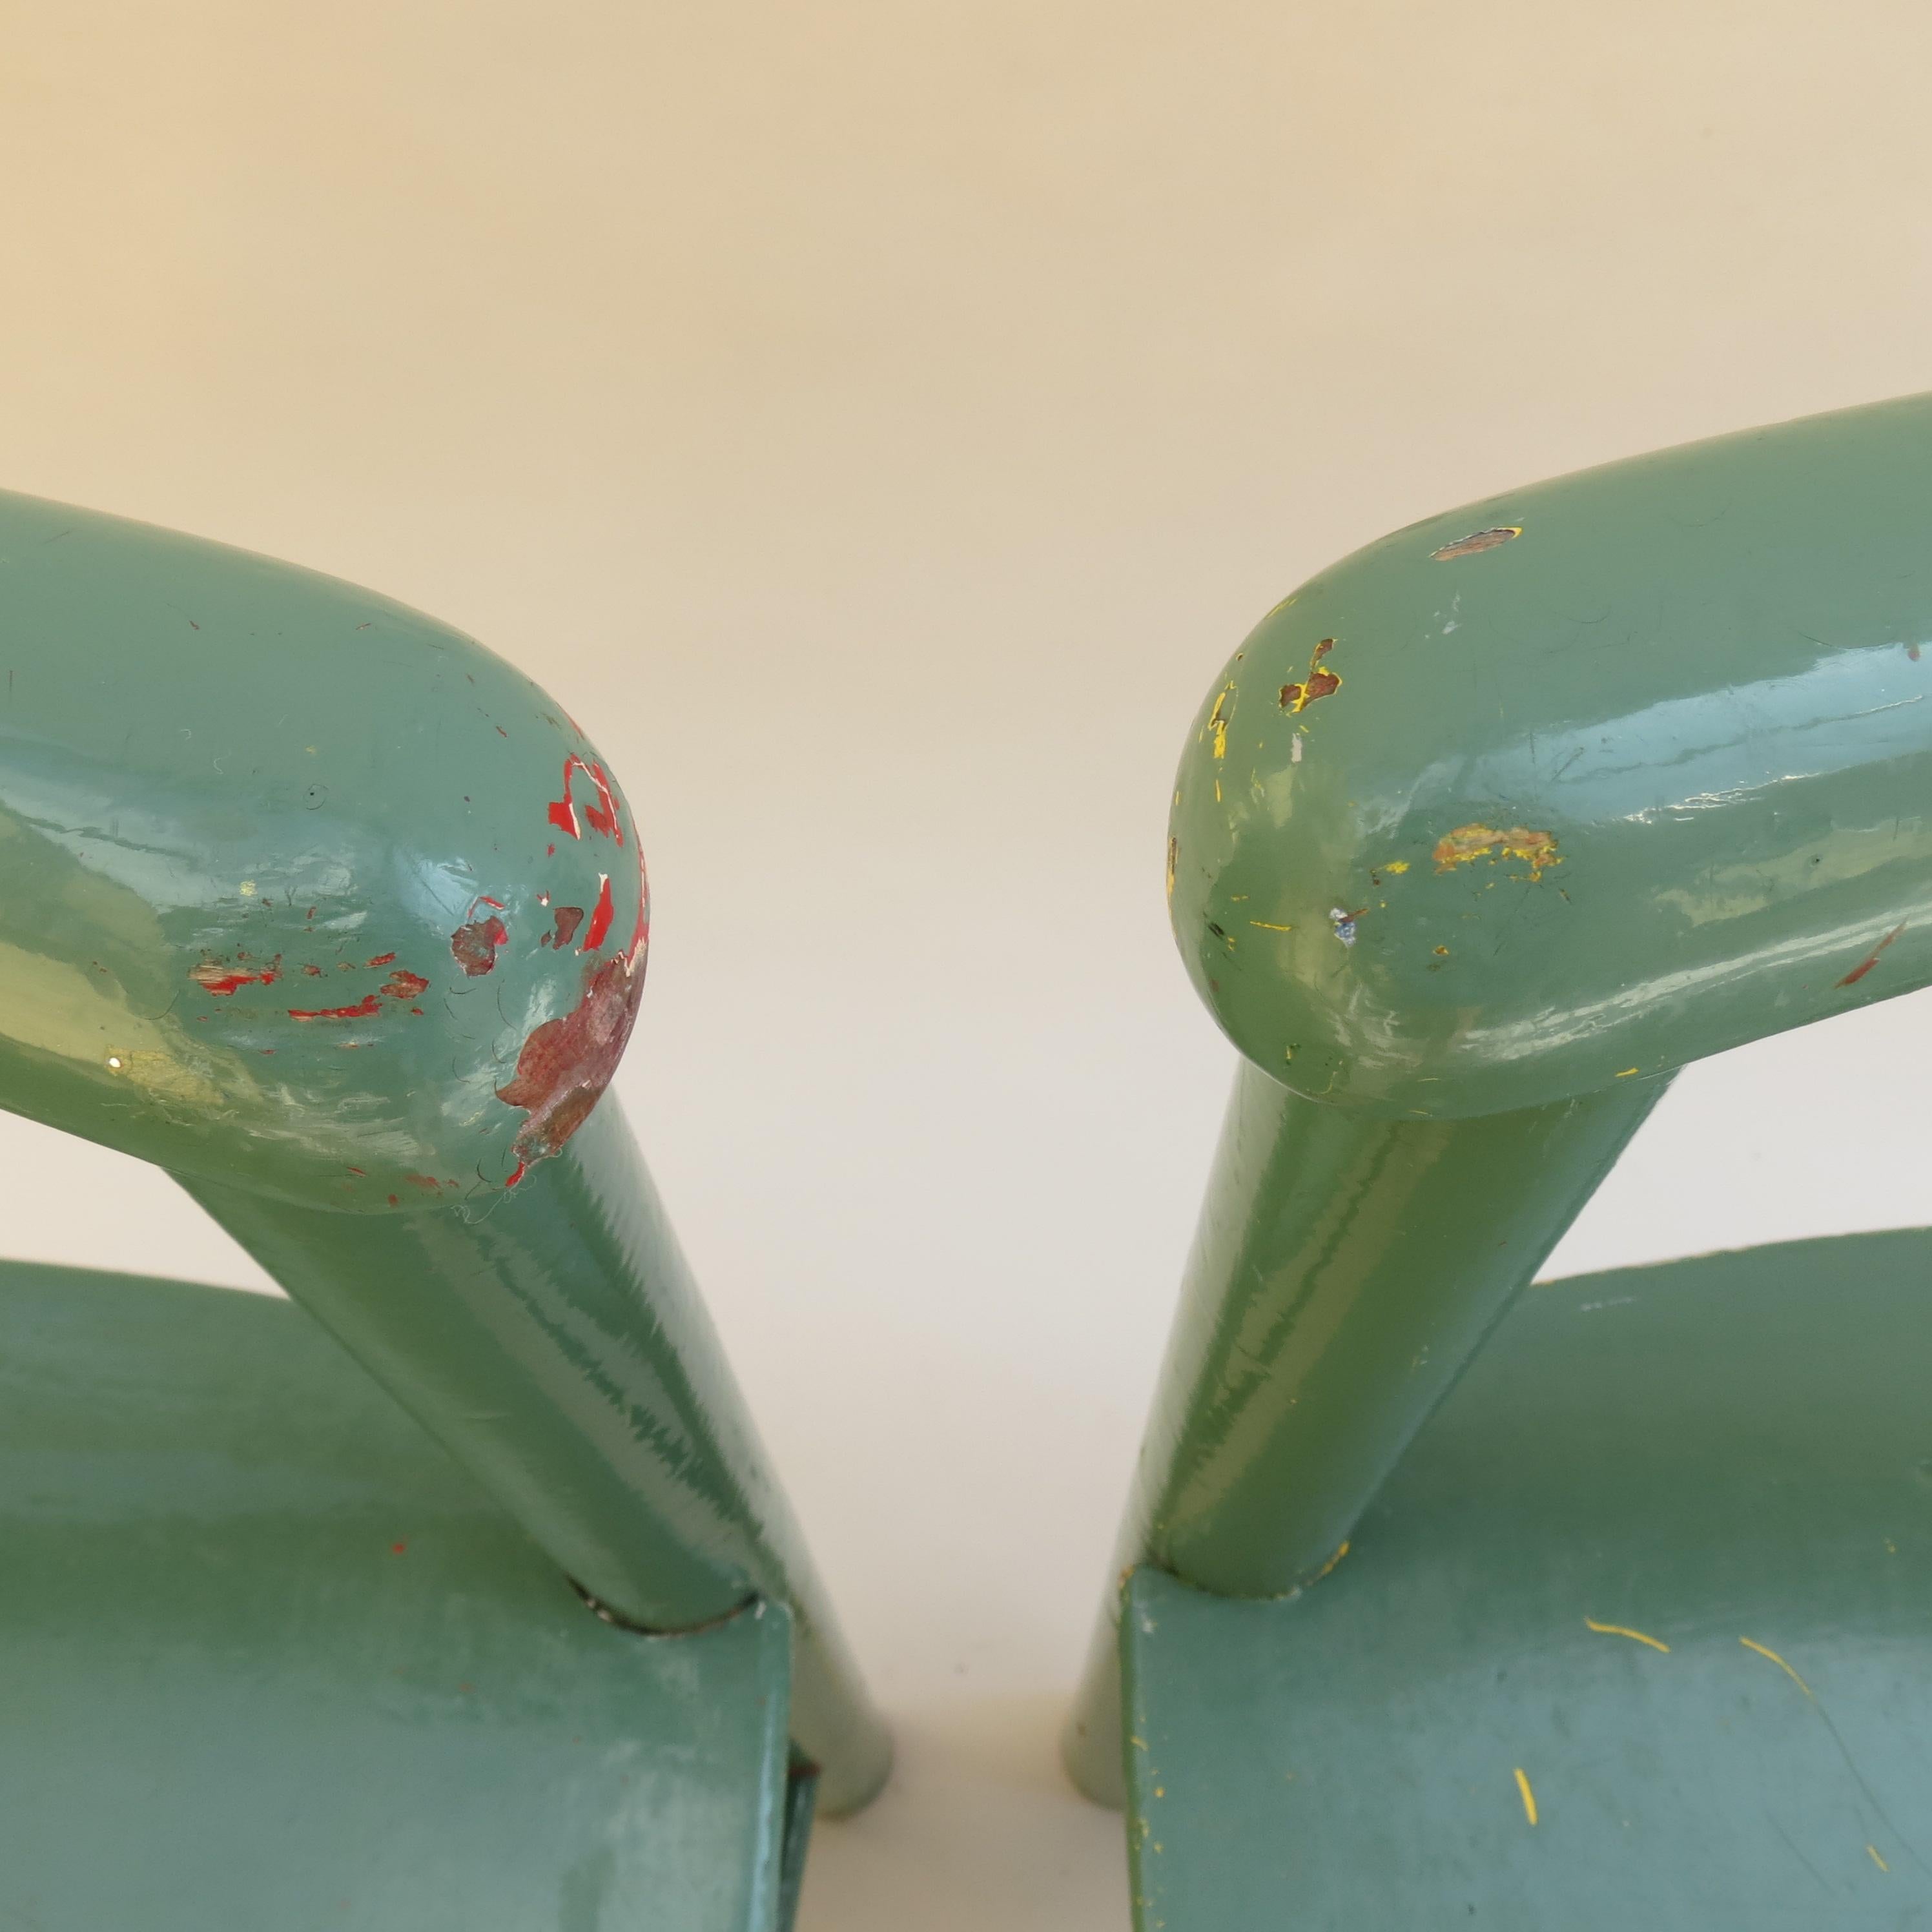 20th Century Pair of Scandinavian Childs Chairs in Green from the 1960s